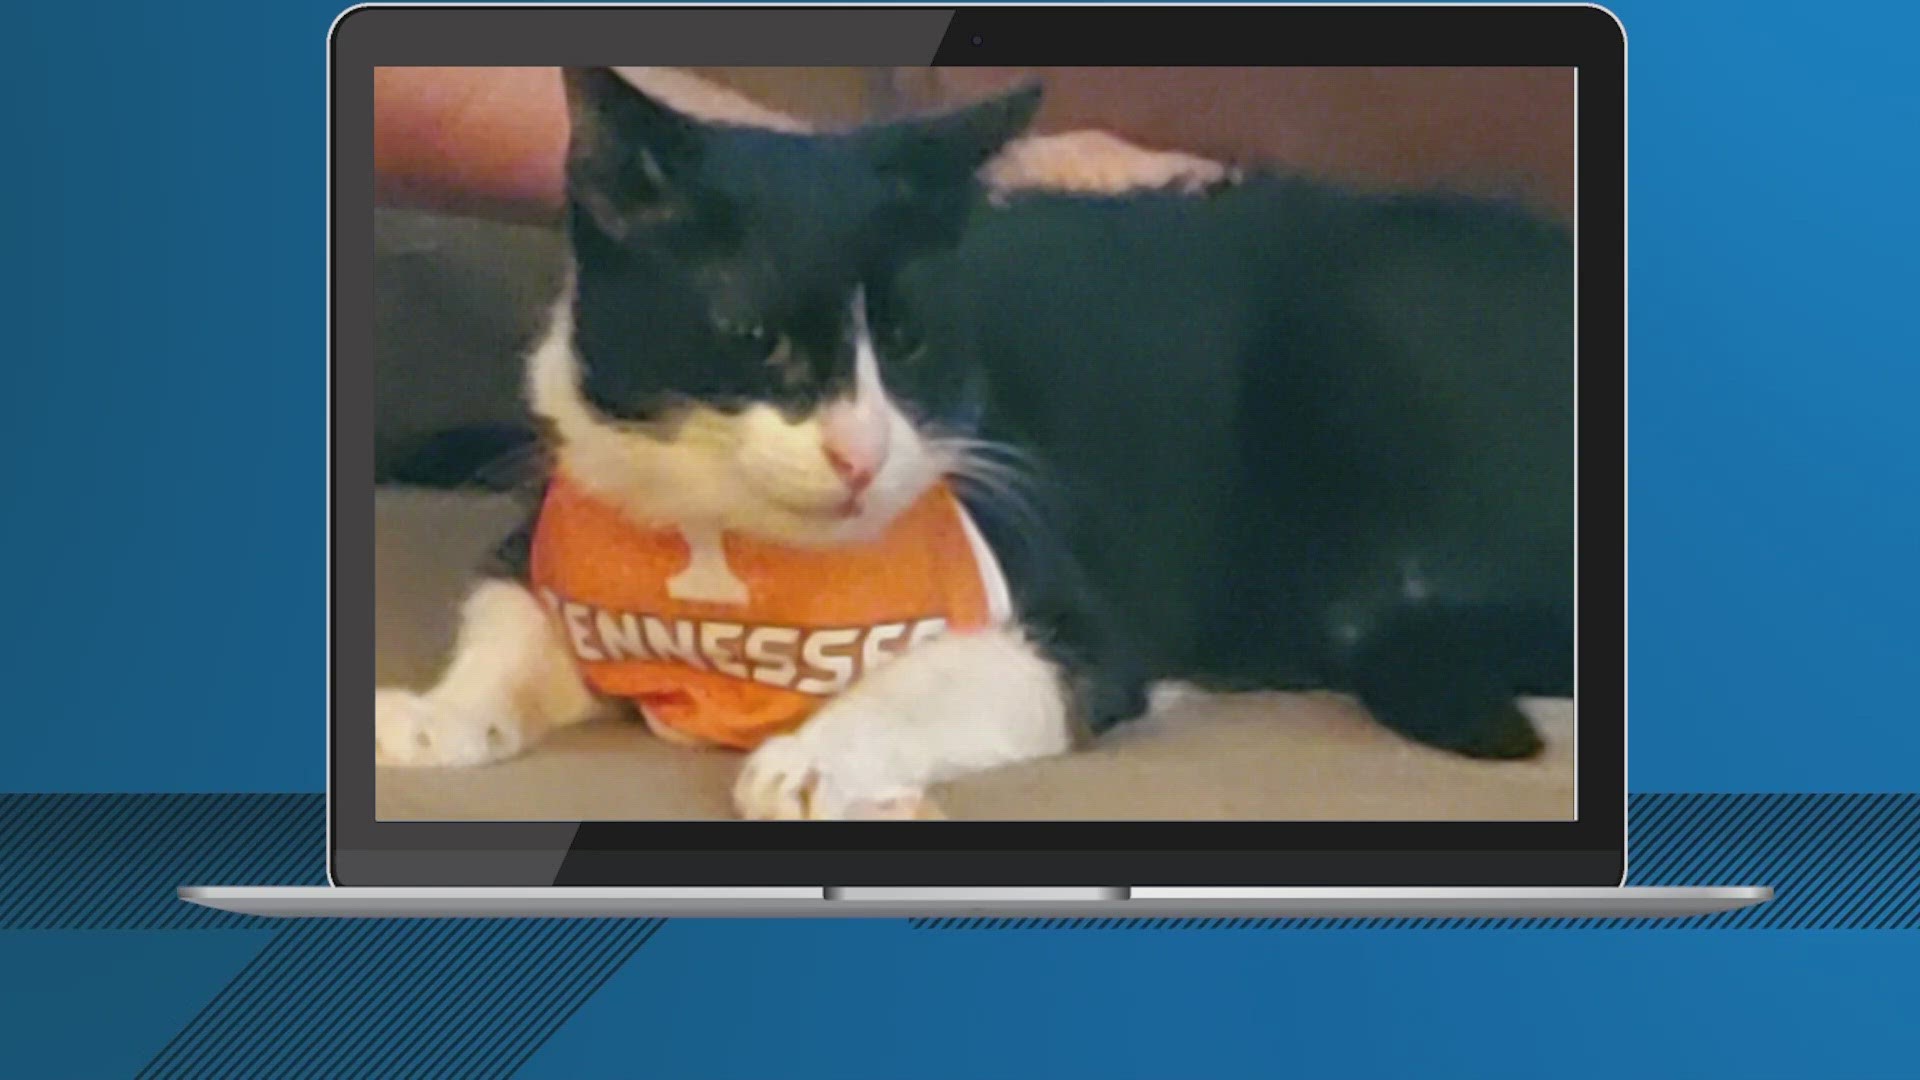 We've been showing you some dogs pulling for Tennessee. Now some cats are, too. 	This is Bo Bo. He is pulling for the vols.